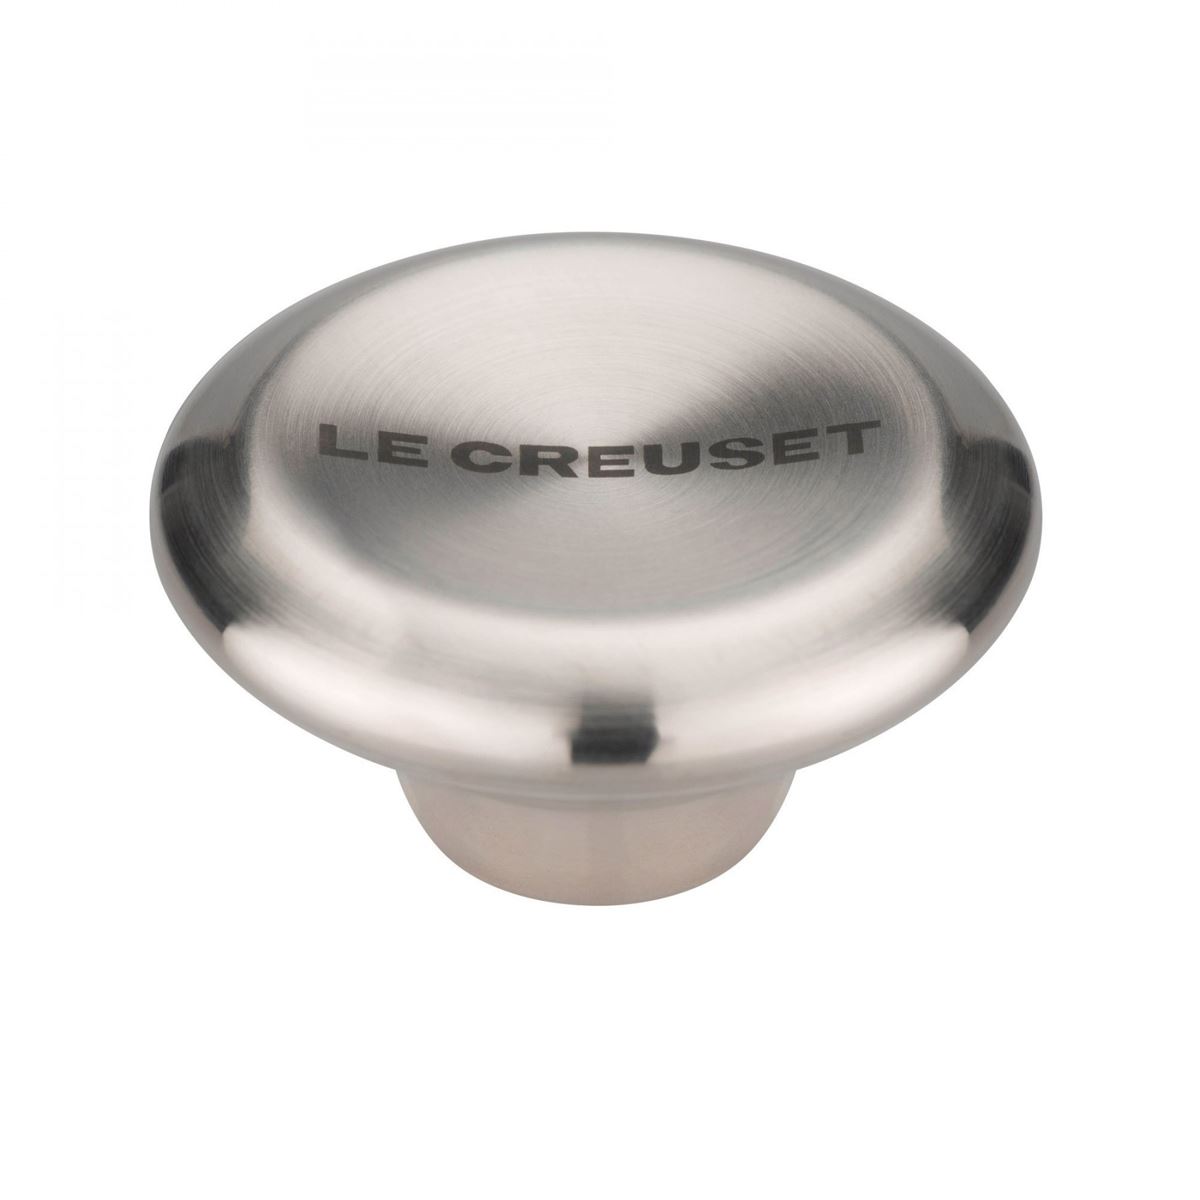 Does this replacement Le Creuset Knob fit all saucepans?